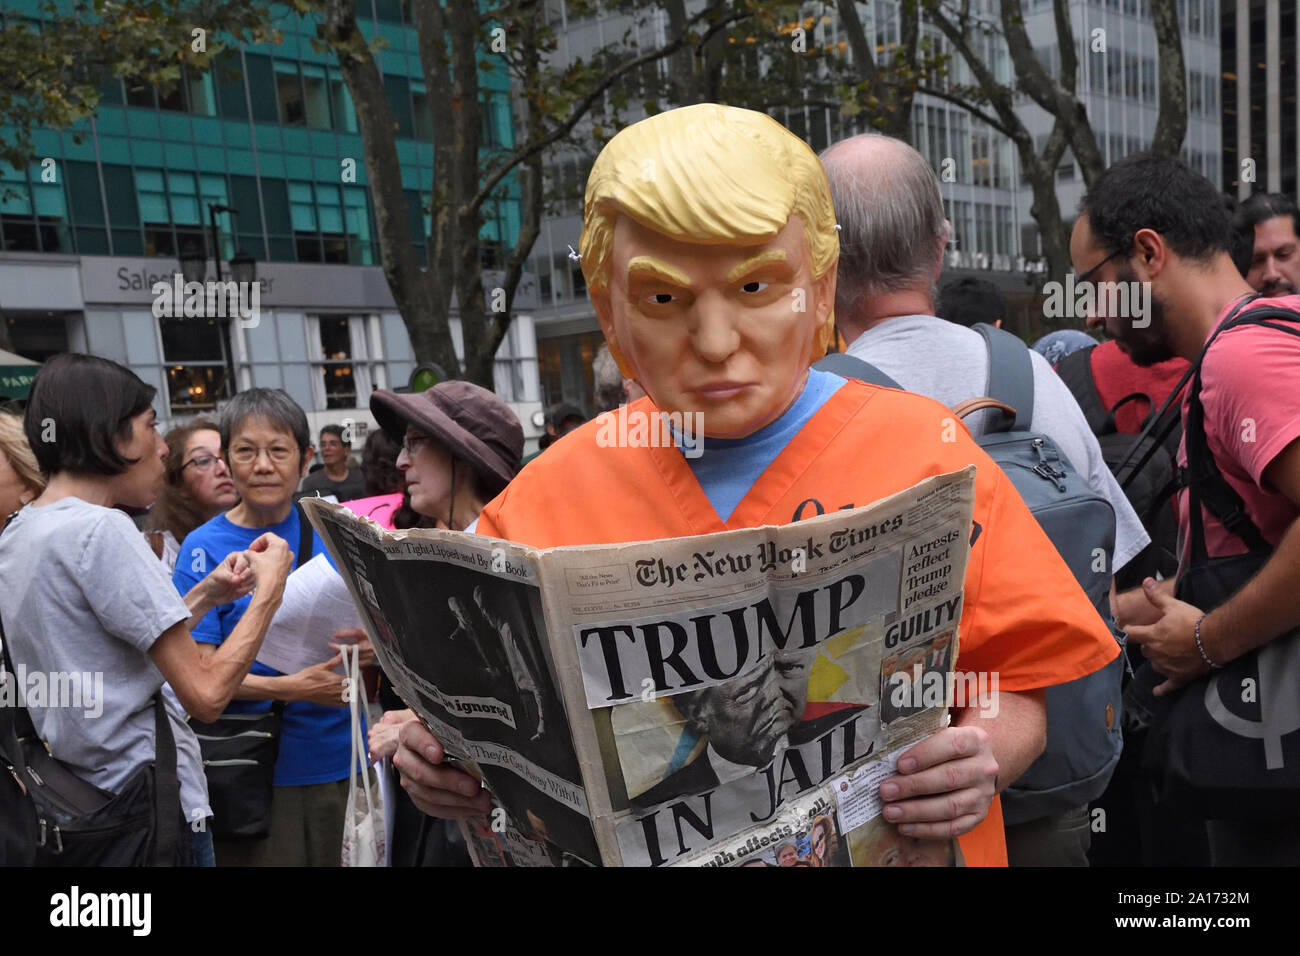 A Protester with a Trump mask during the Rise and Resist - United in Outrage, a Resistance March along Fifth Avenue. Stock Photo